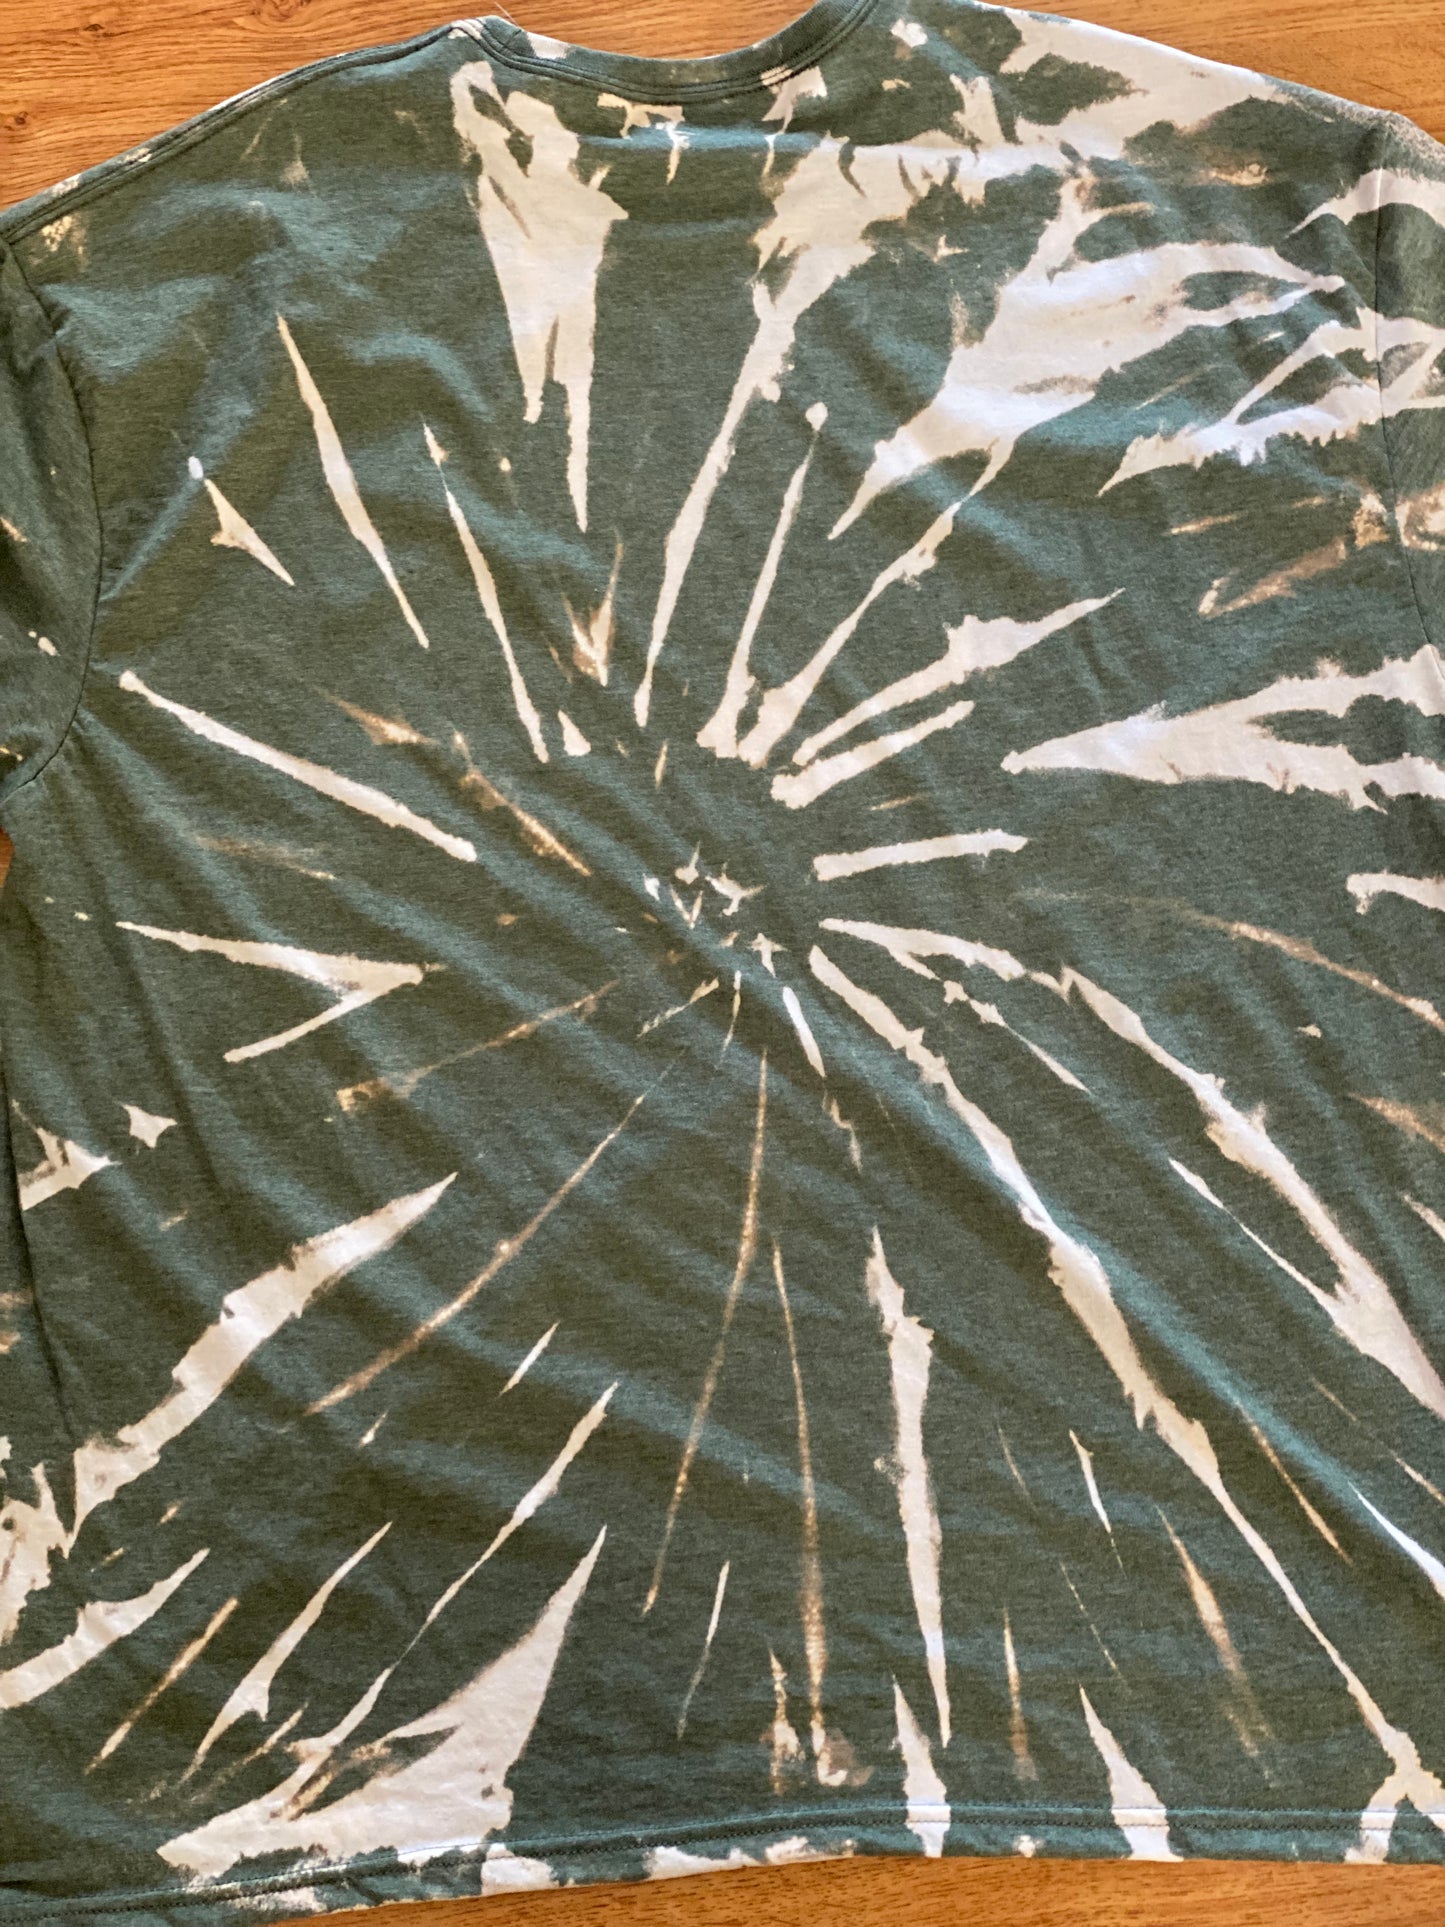 Tie Dye Bleached Tee- God Bless the USA